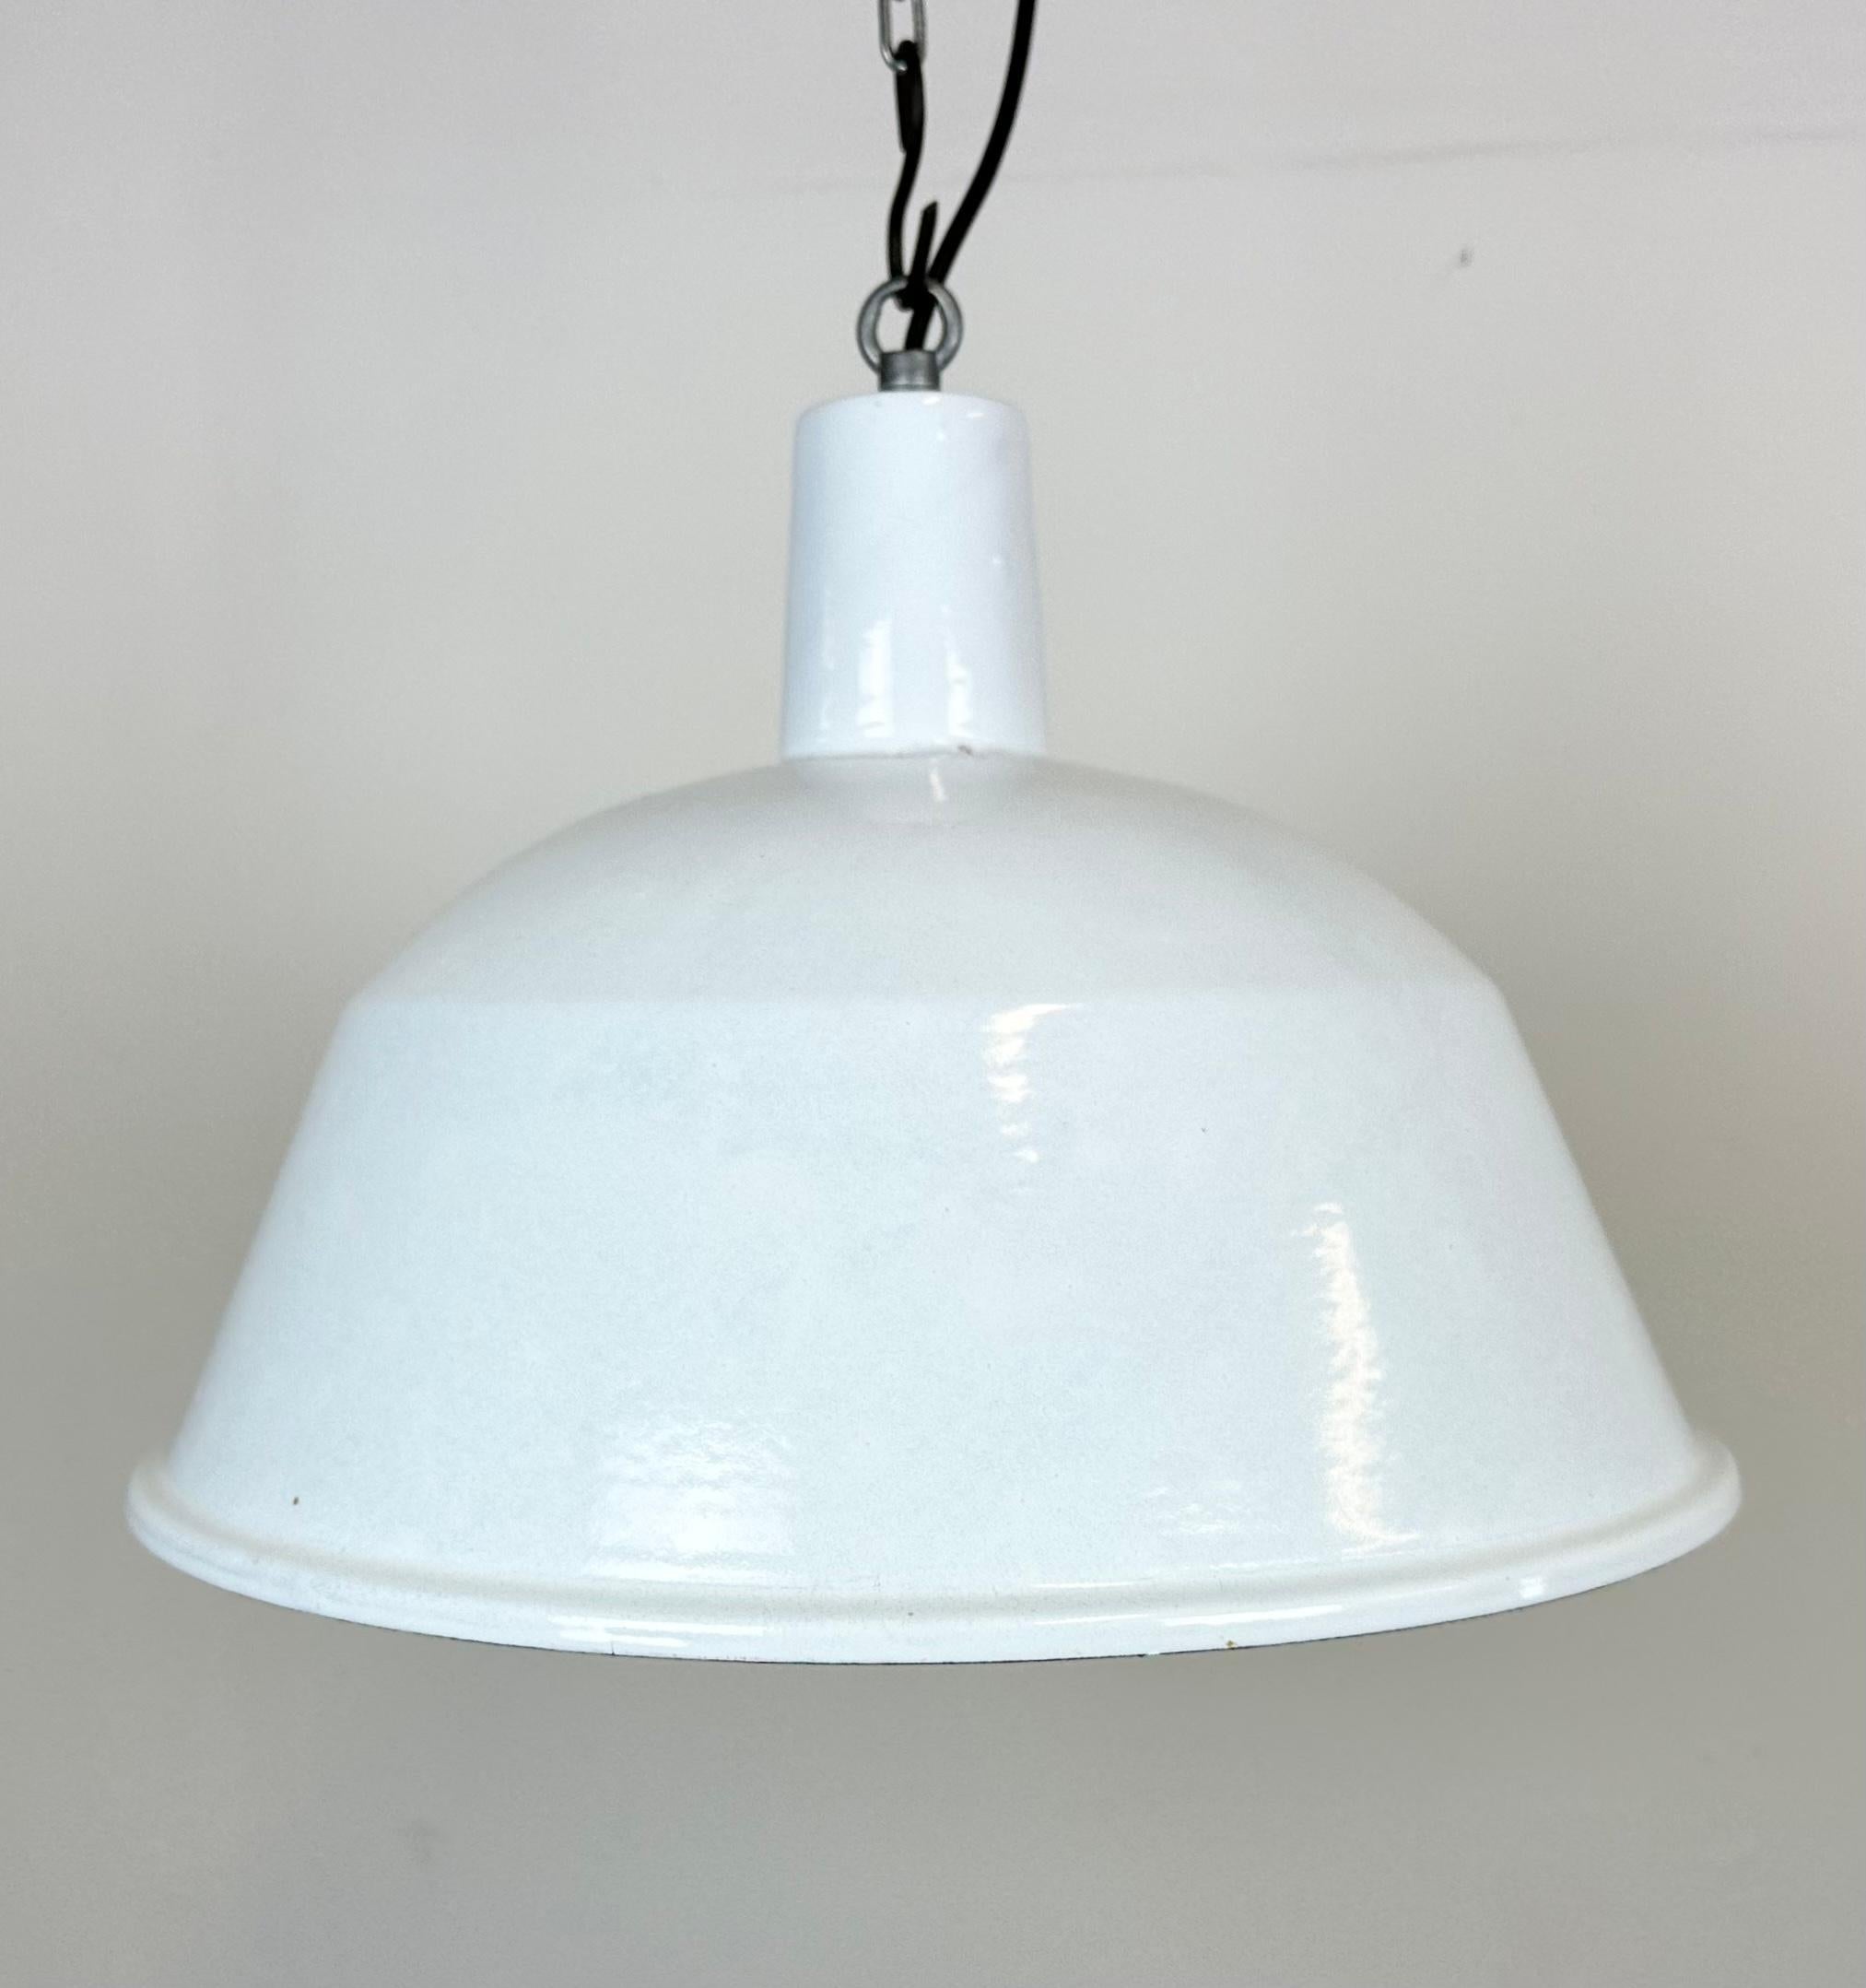 Hungarian Industrial White Enamel Pendant Lamp from Emax, 1960s For Sale